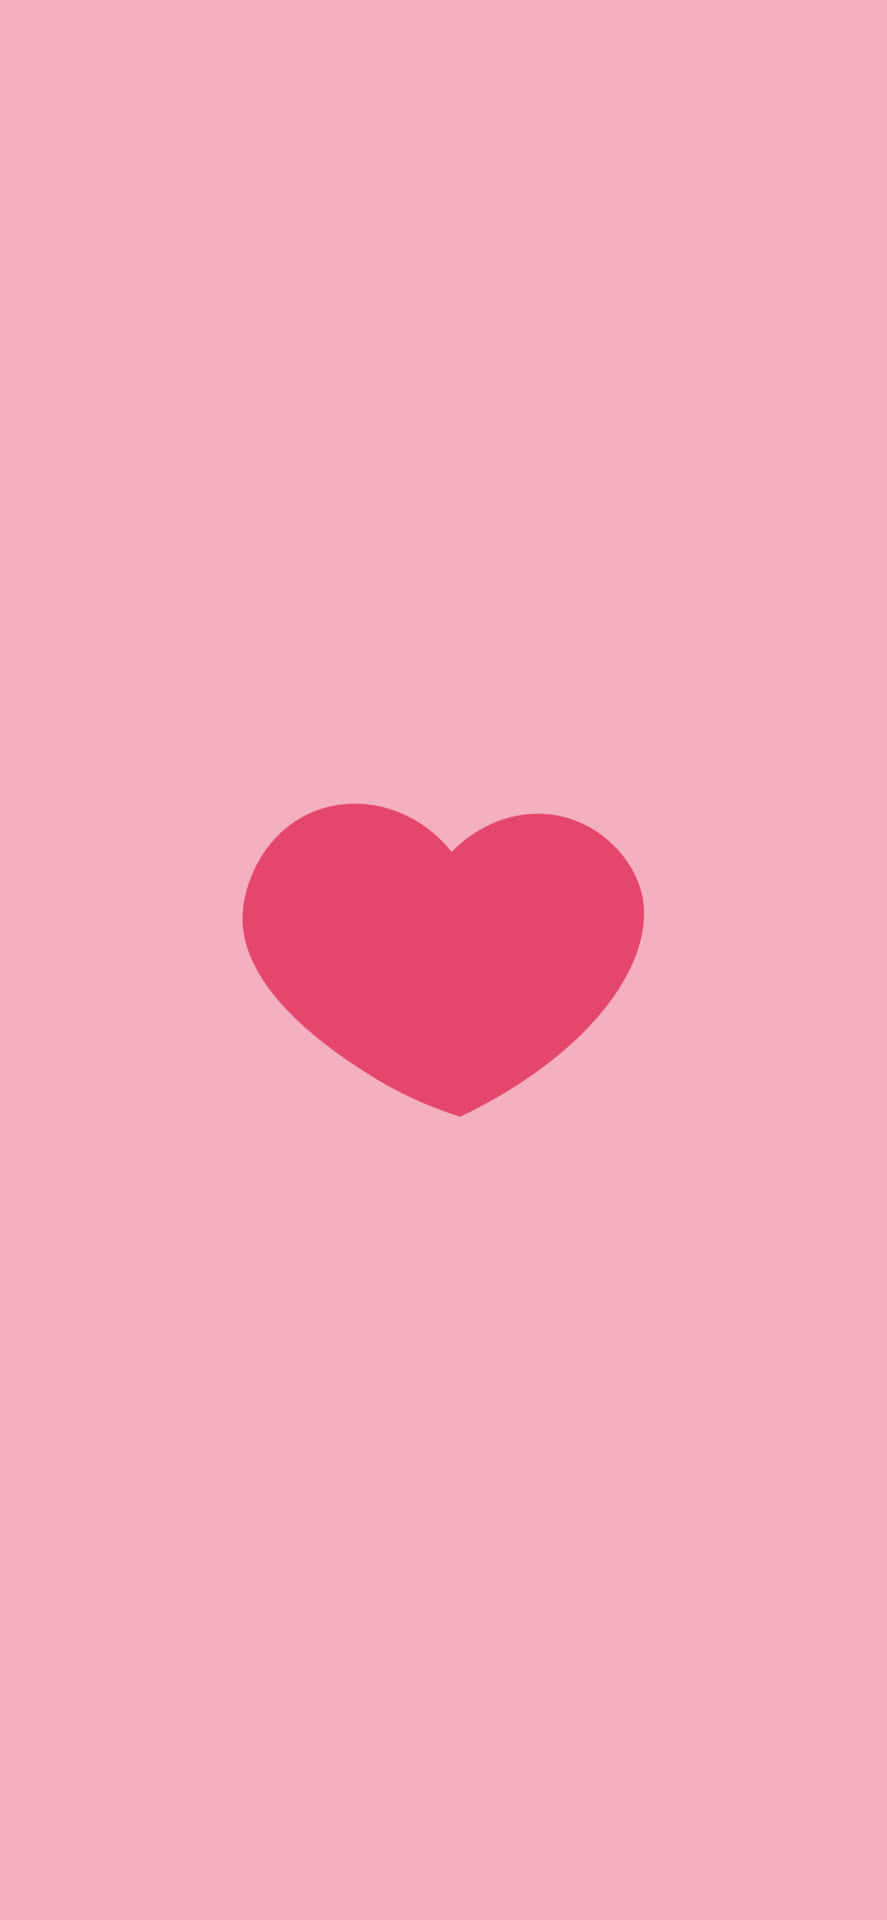 A Pink Heart On A Pink Background